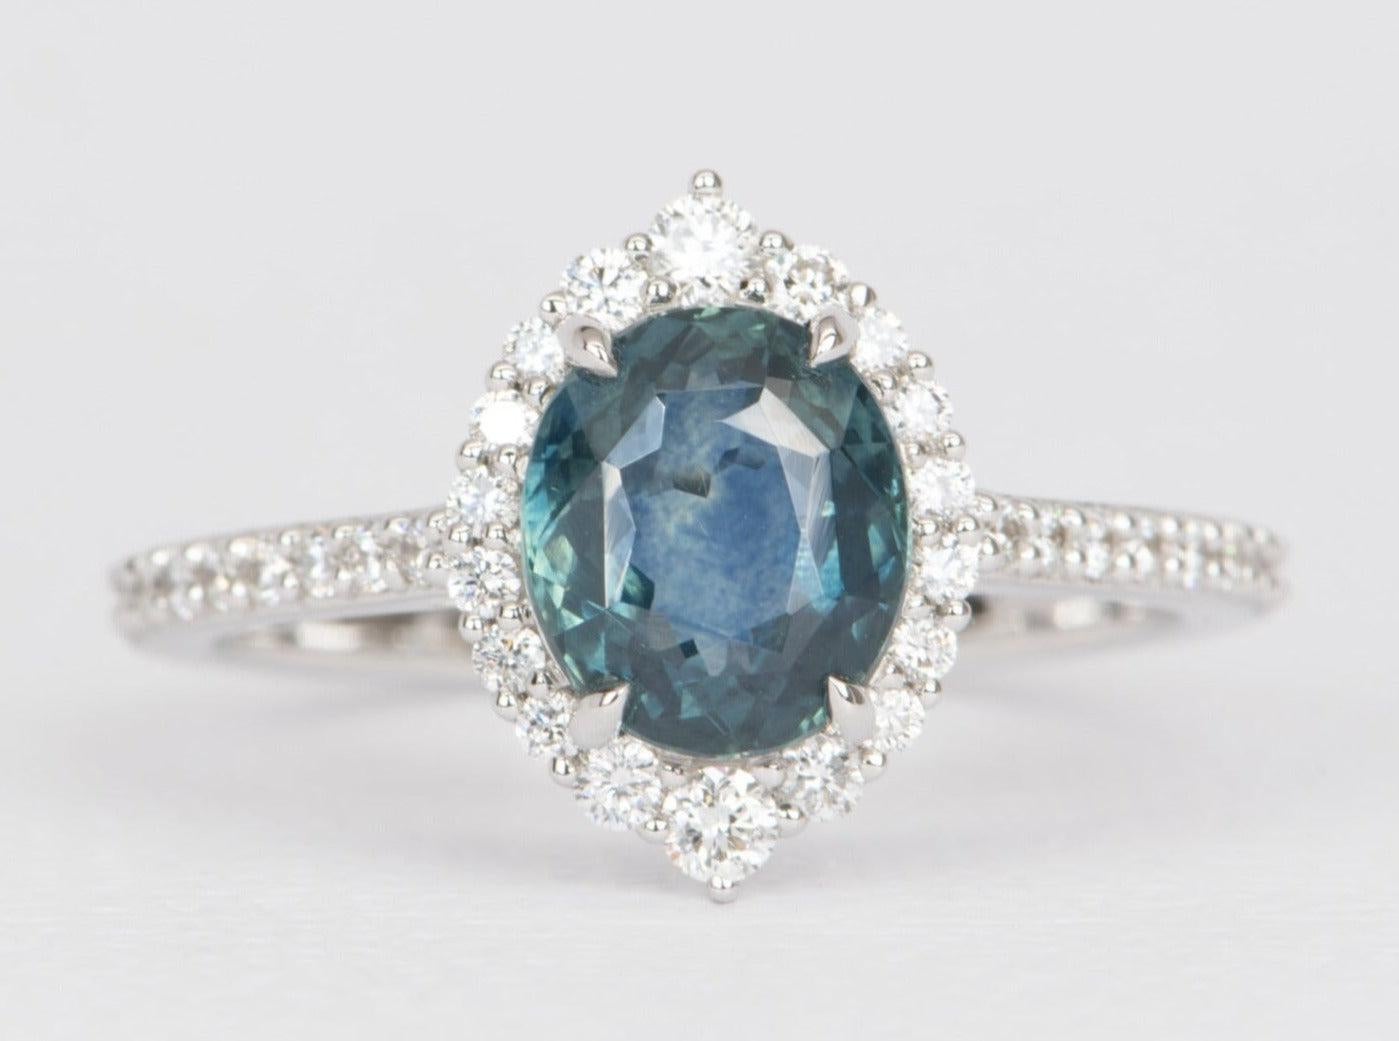 ♥ 1.41ct Montana Sapphire with Diamond Halo and Pave Band 14K White Gold Engagement Ring
♥ Solid 14k white gold ring set with a beautiful oval-shaped montana sapphire
♥ Gorgeous blue green color!
♥ The item measures 12 mm in length, 8.6 mm in width,